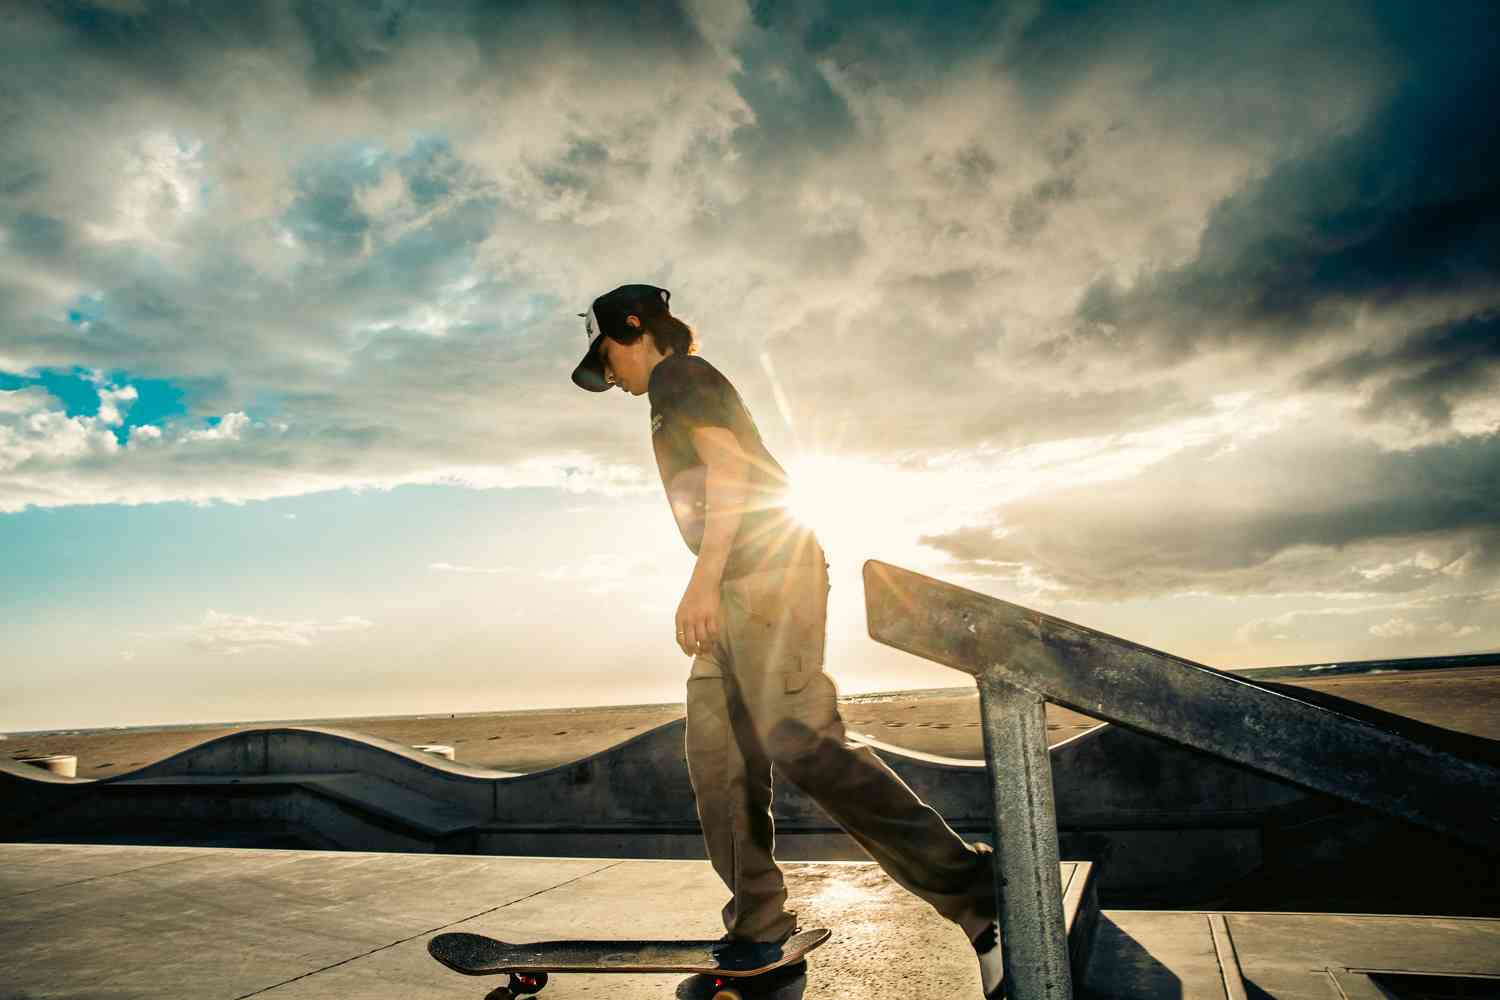 Iconic Editorial Images of SKATE PARK VENICE BEACH, a photo taken by Warwick Saint in The Saint Studio